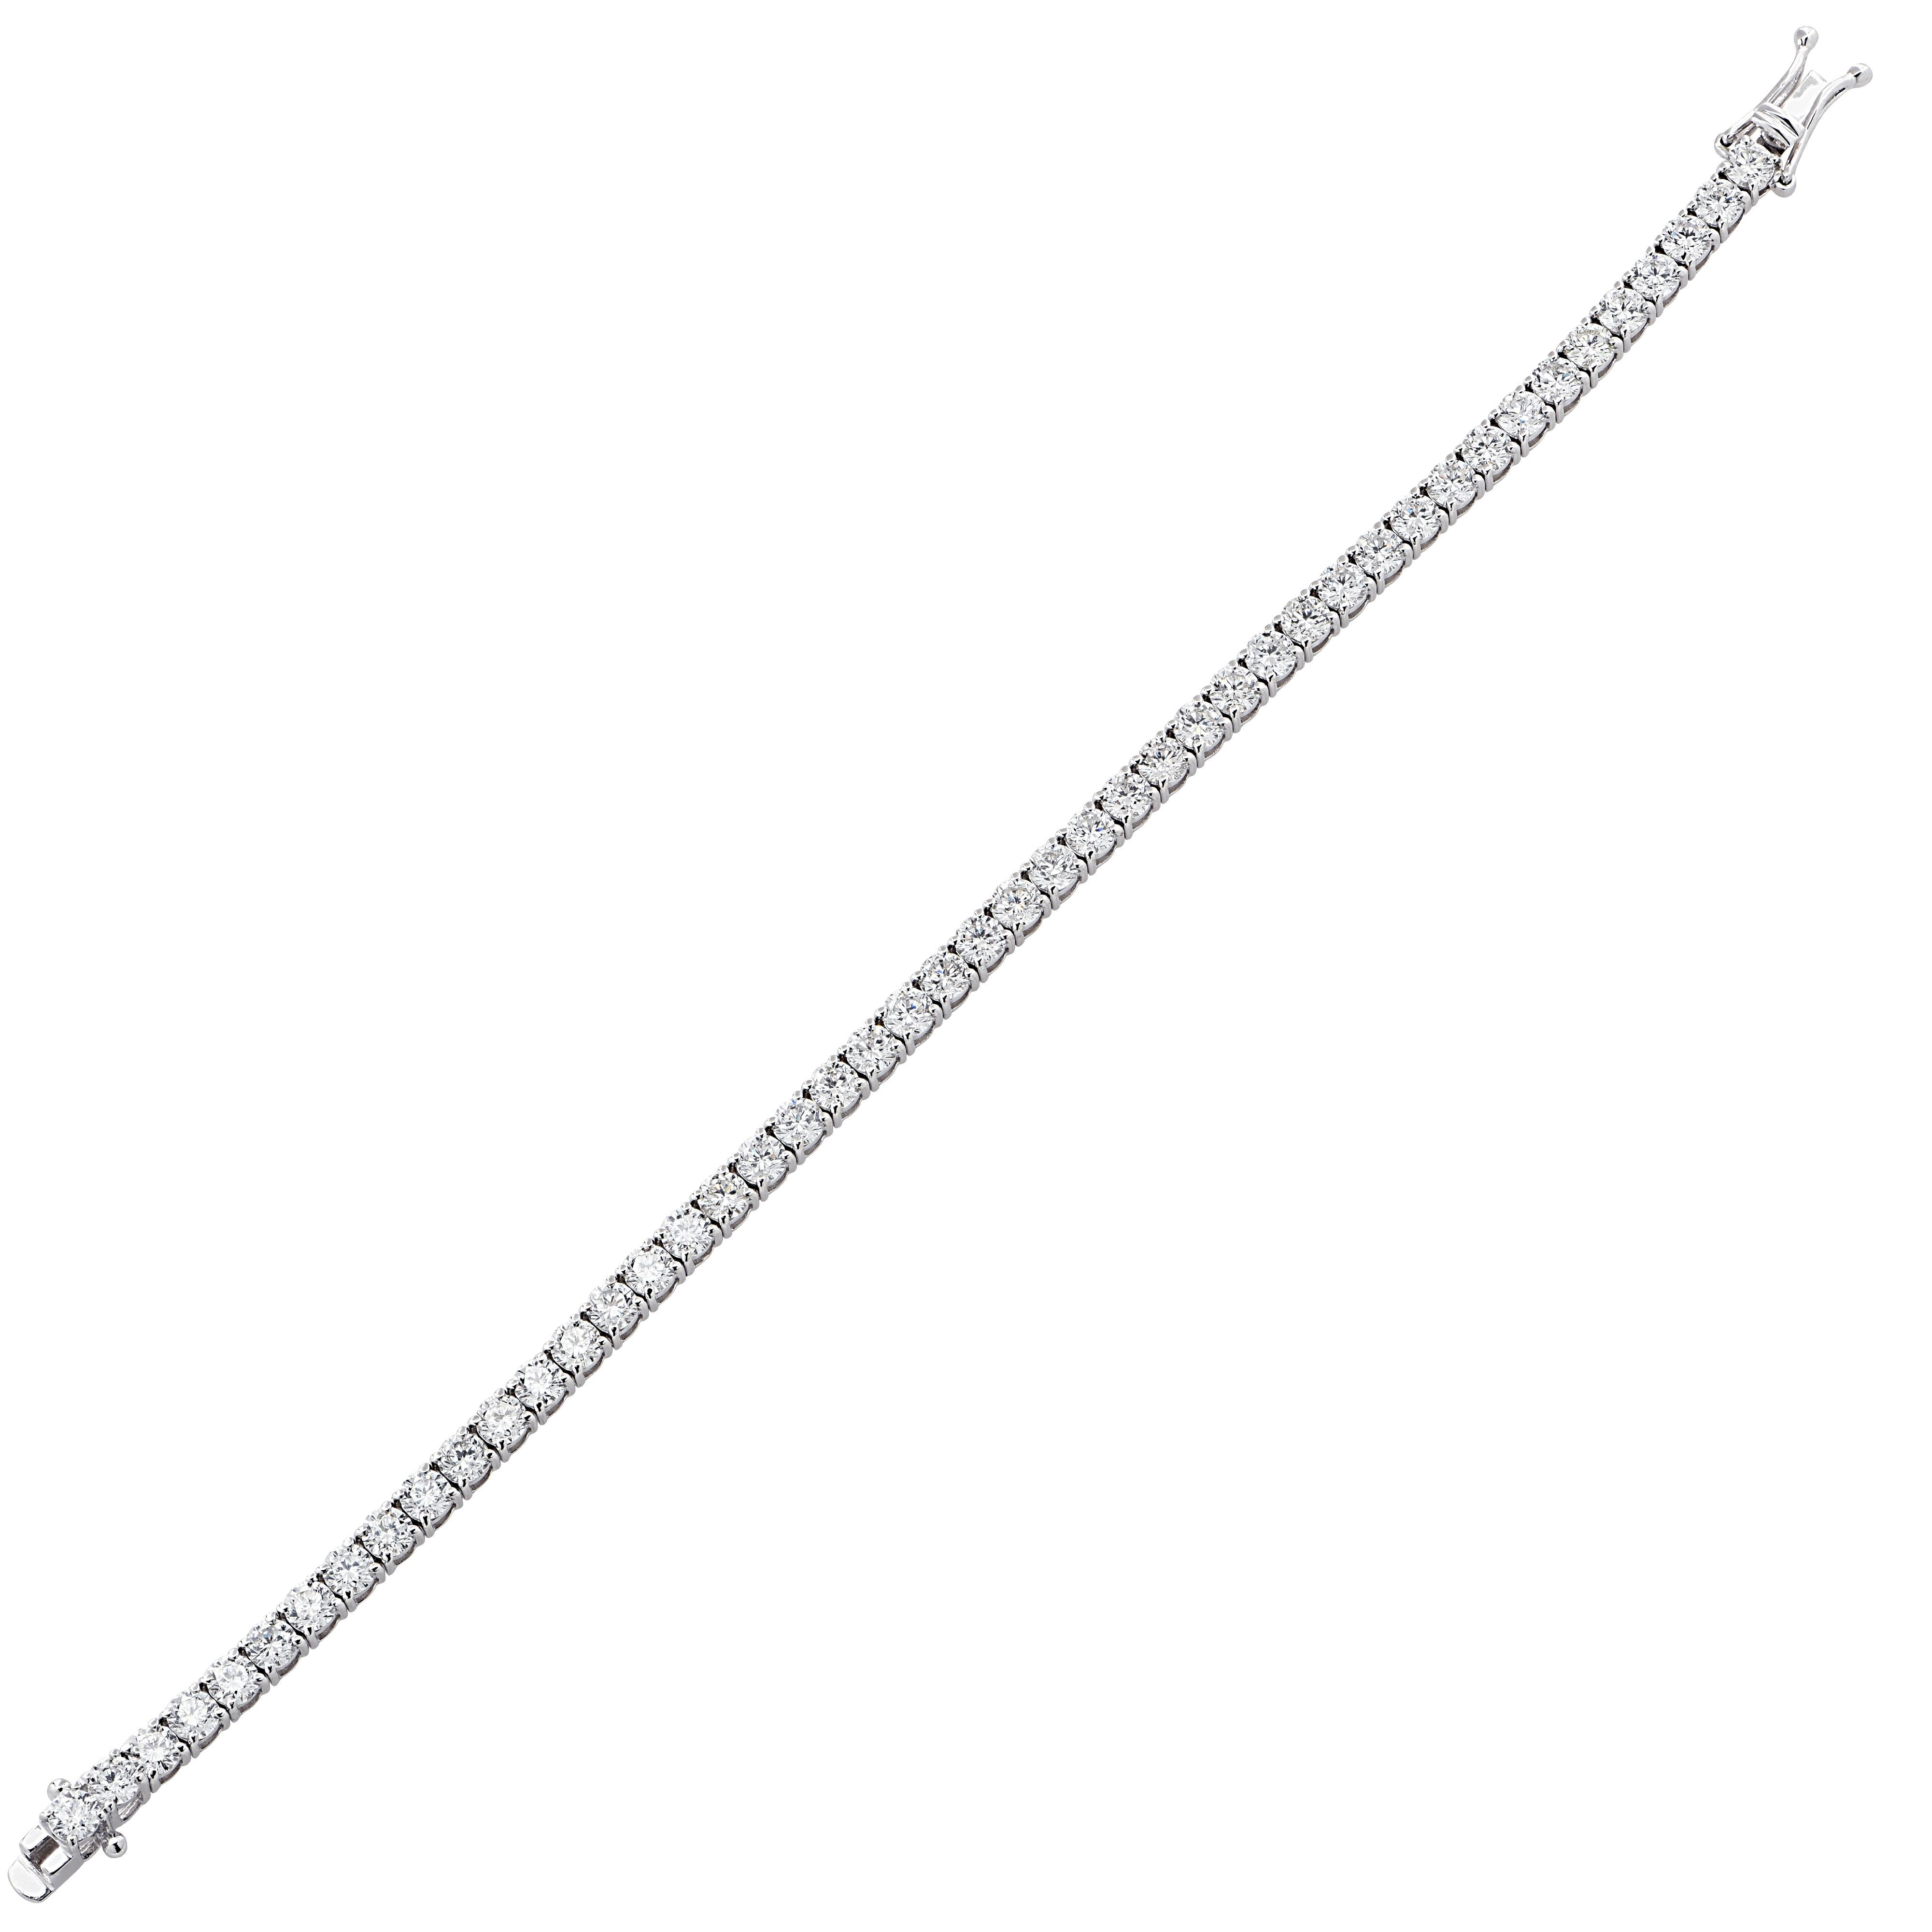 Exquisite Vivid Diamonds diamond tennis bracelet crafted in 18 karat white gold, showcasing 47 stunning round brilliant cut diamonds weighing 8.85 carats total, F color, SI clarity. Each diamond is carefully selected, perfectly matched and set in a